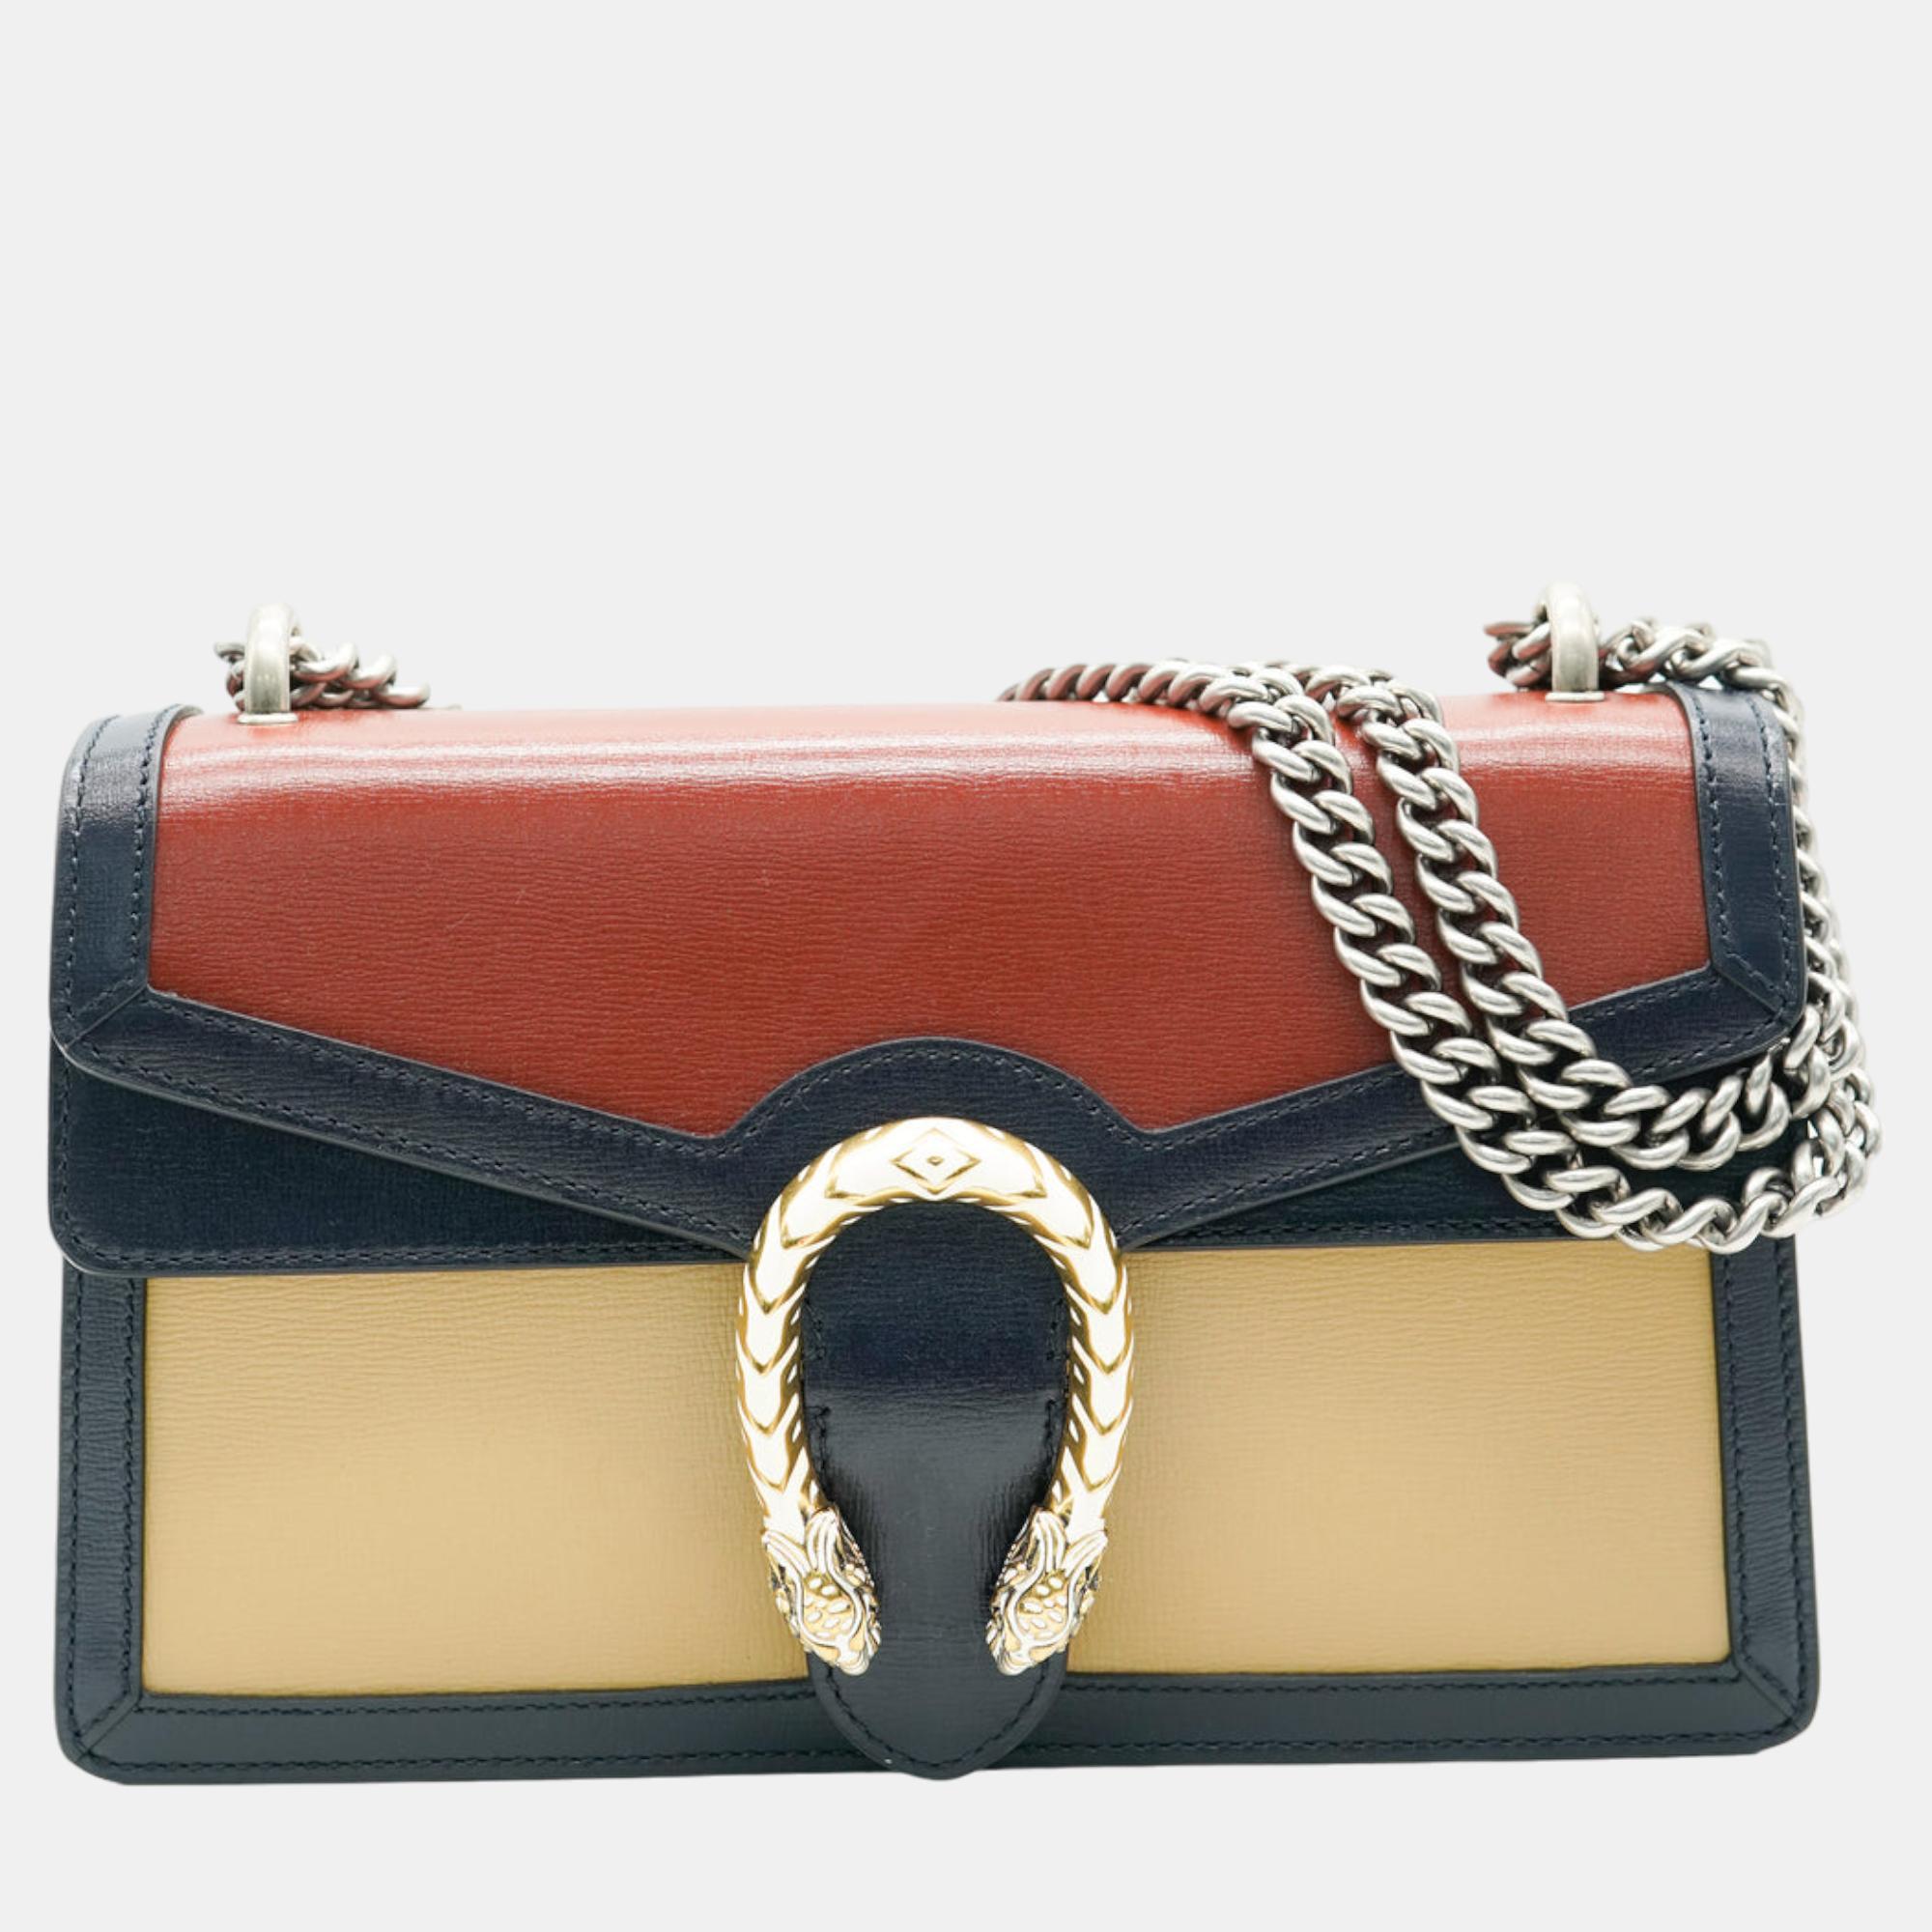 Gucci tricolour leather small dionysus shoulder bag